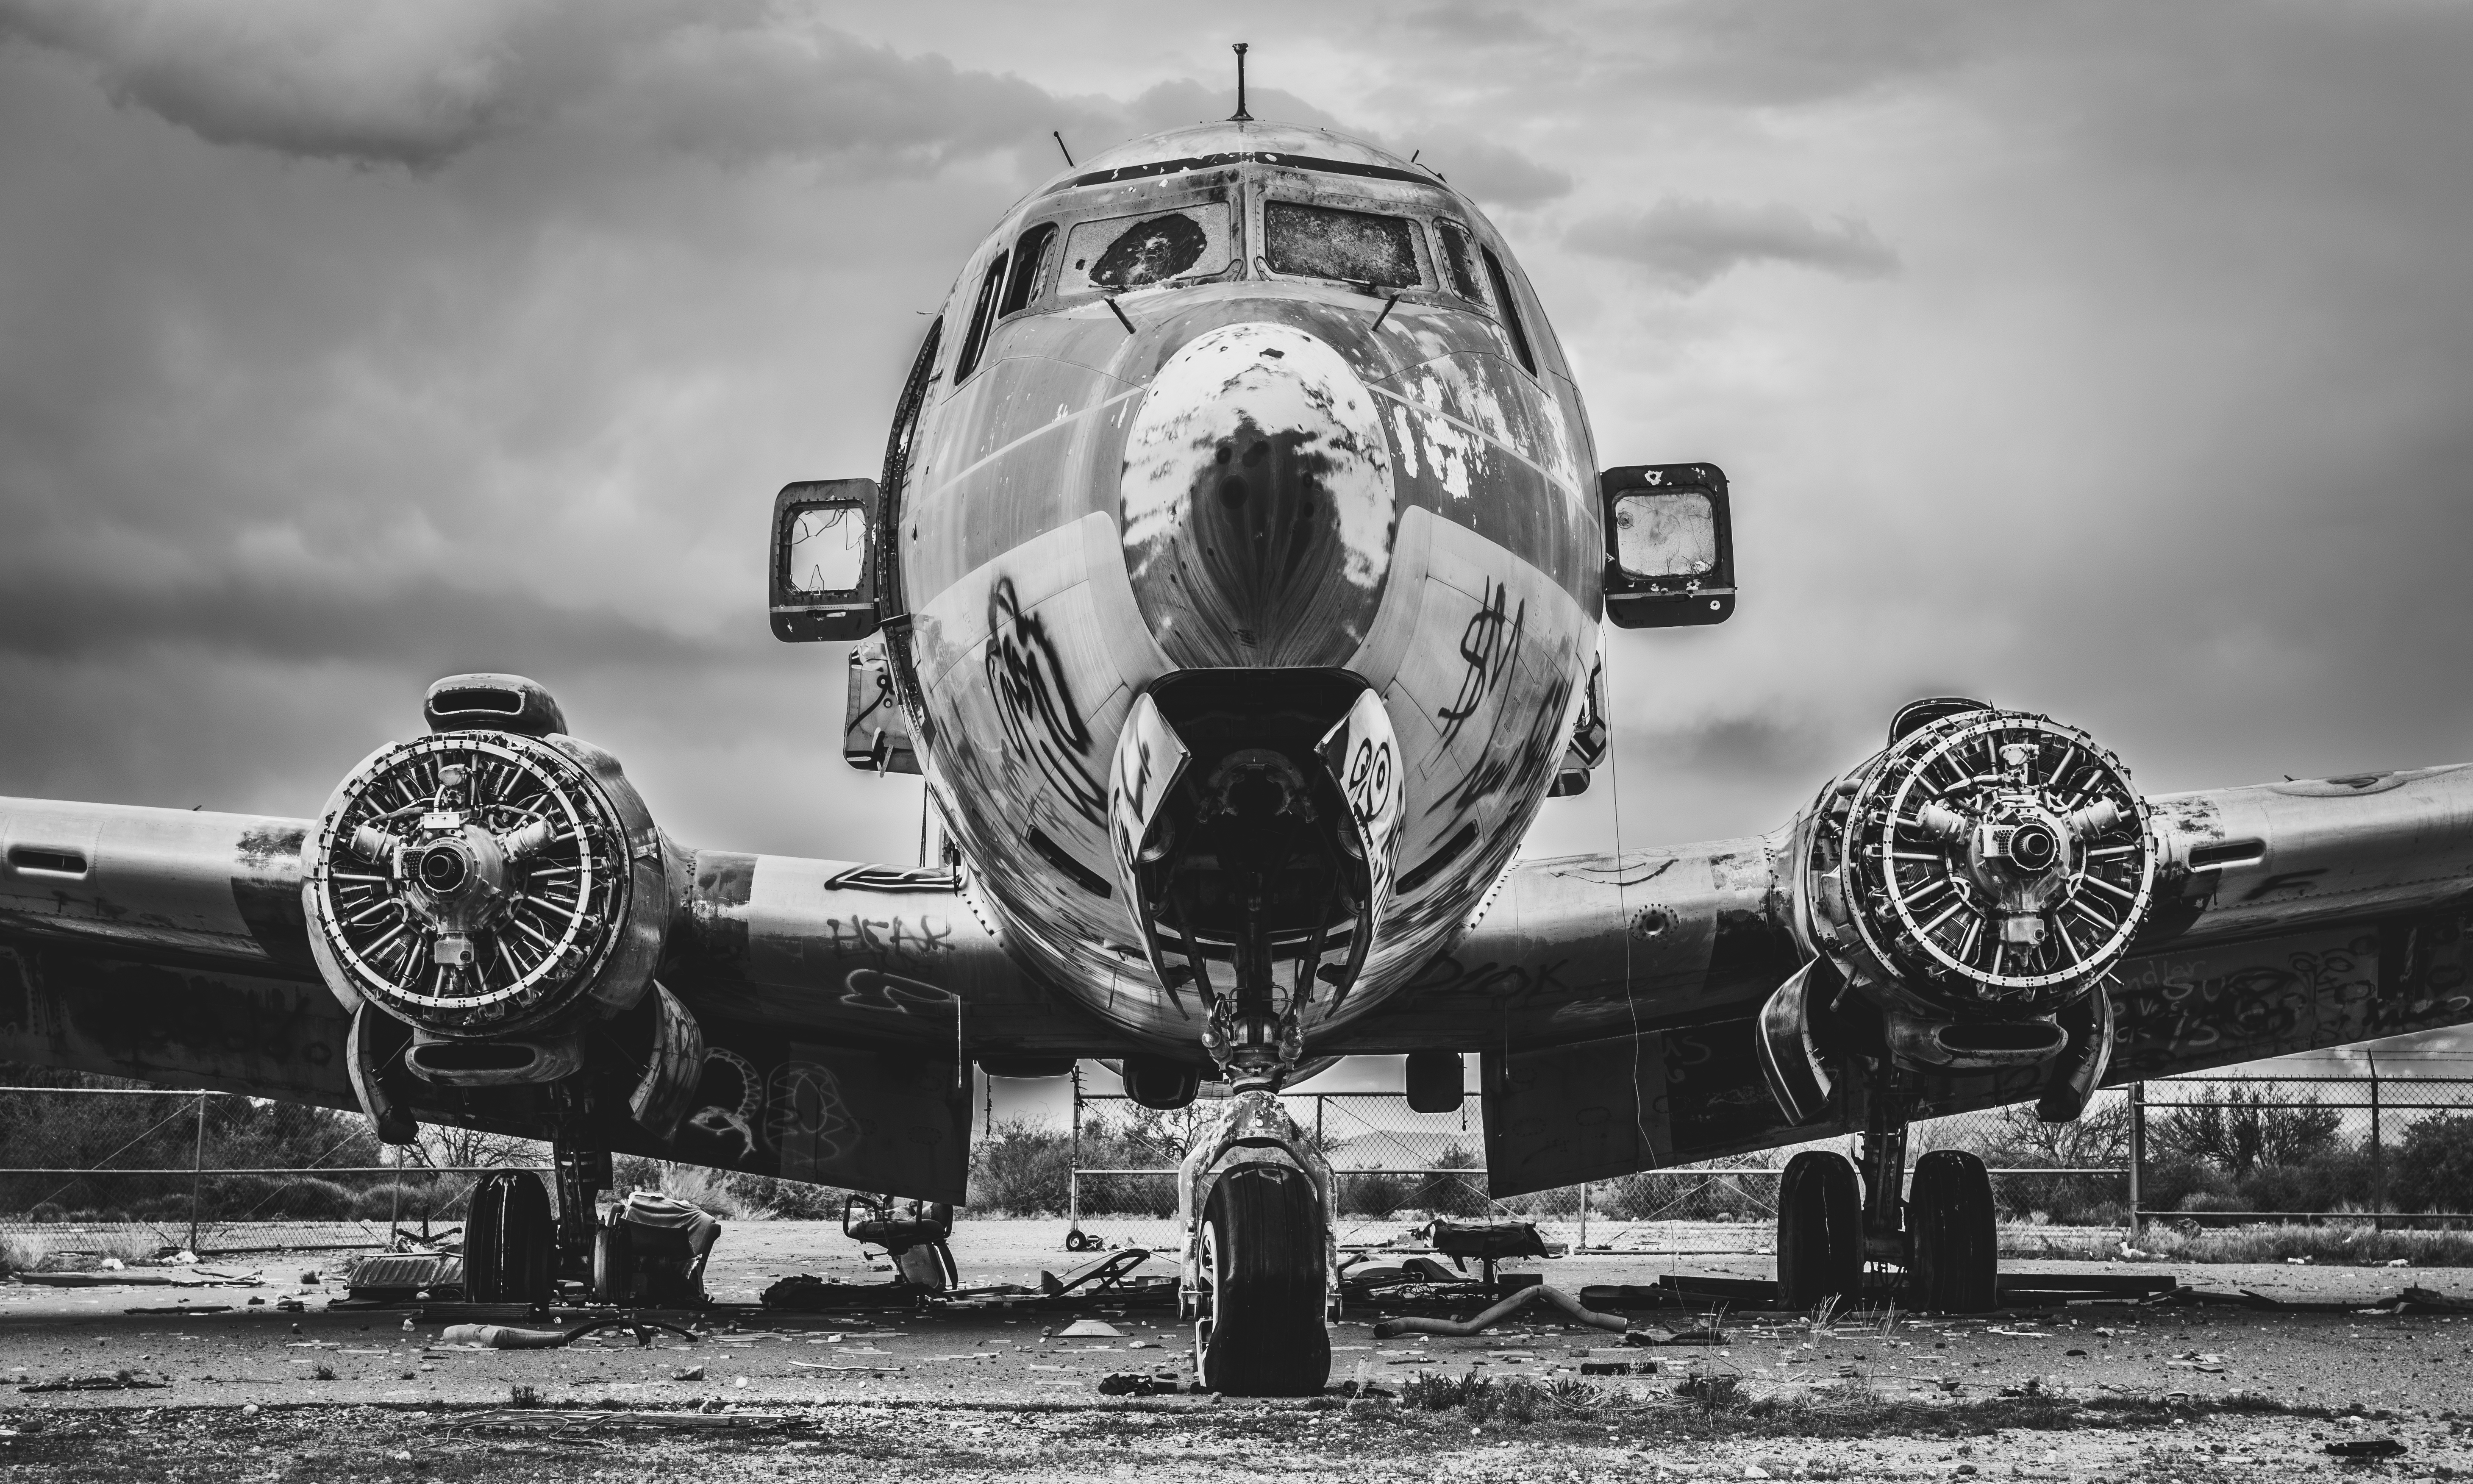 Wallpaper, douglas, dc aircraft, old, airplane, plane, planes, airplanes, wreck, gila, river, Indian, native, american, black, white, phoenix, chandler, Arizona, USA, glory, desaturated, airport, airpark, landing, take, off, goodyear, holiday, travel